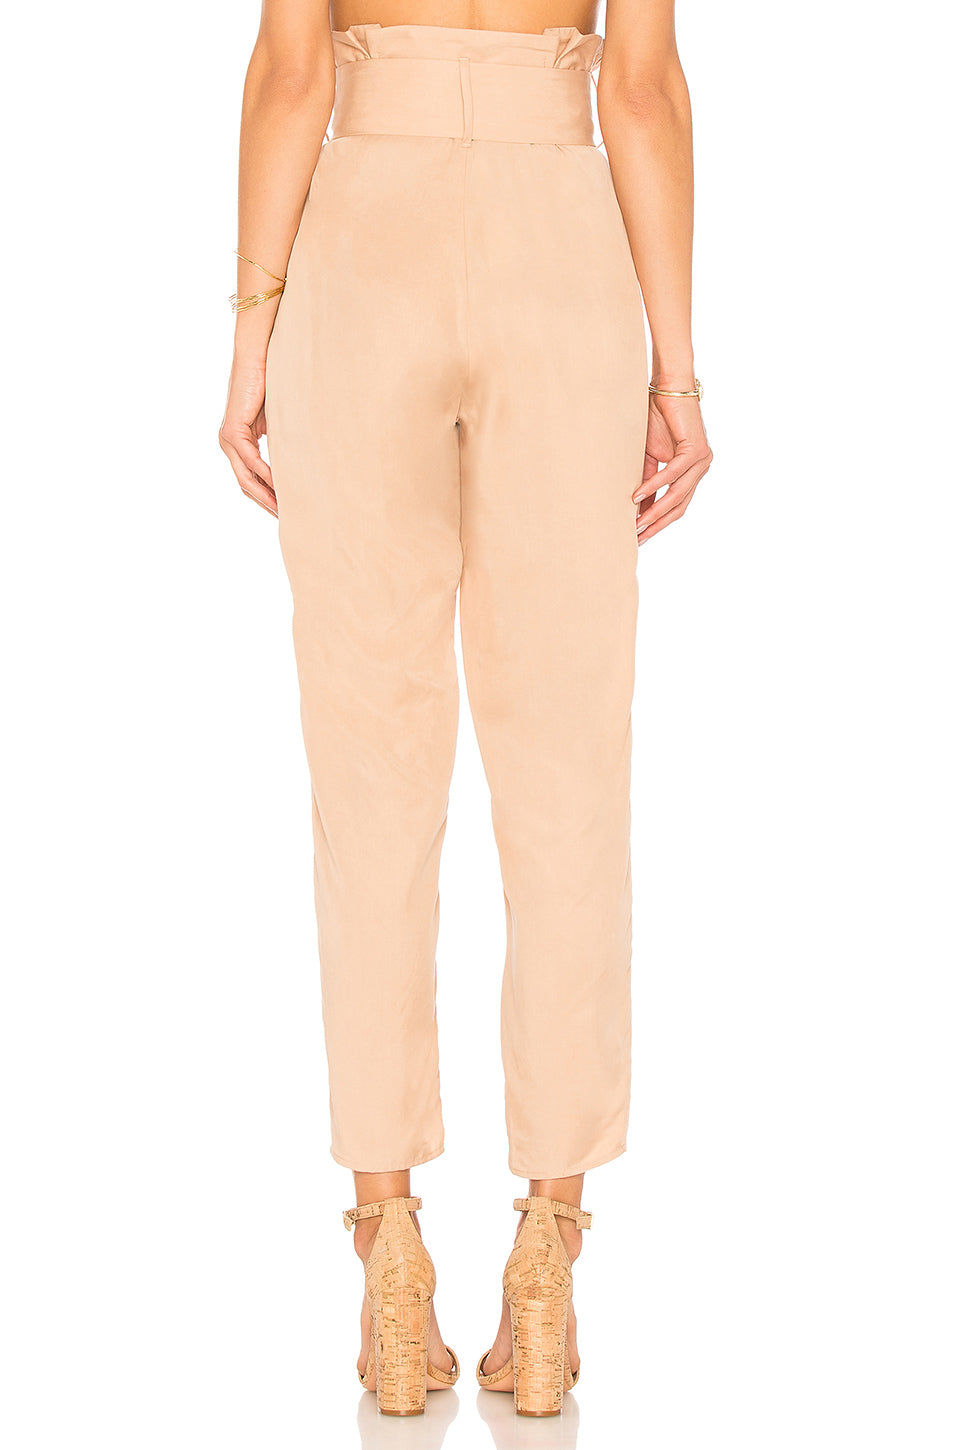 Greyson Trouser in SAND